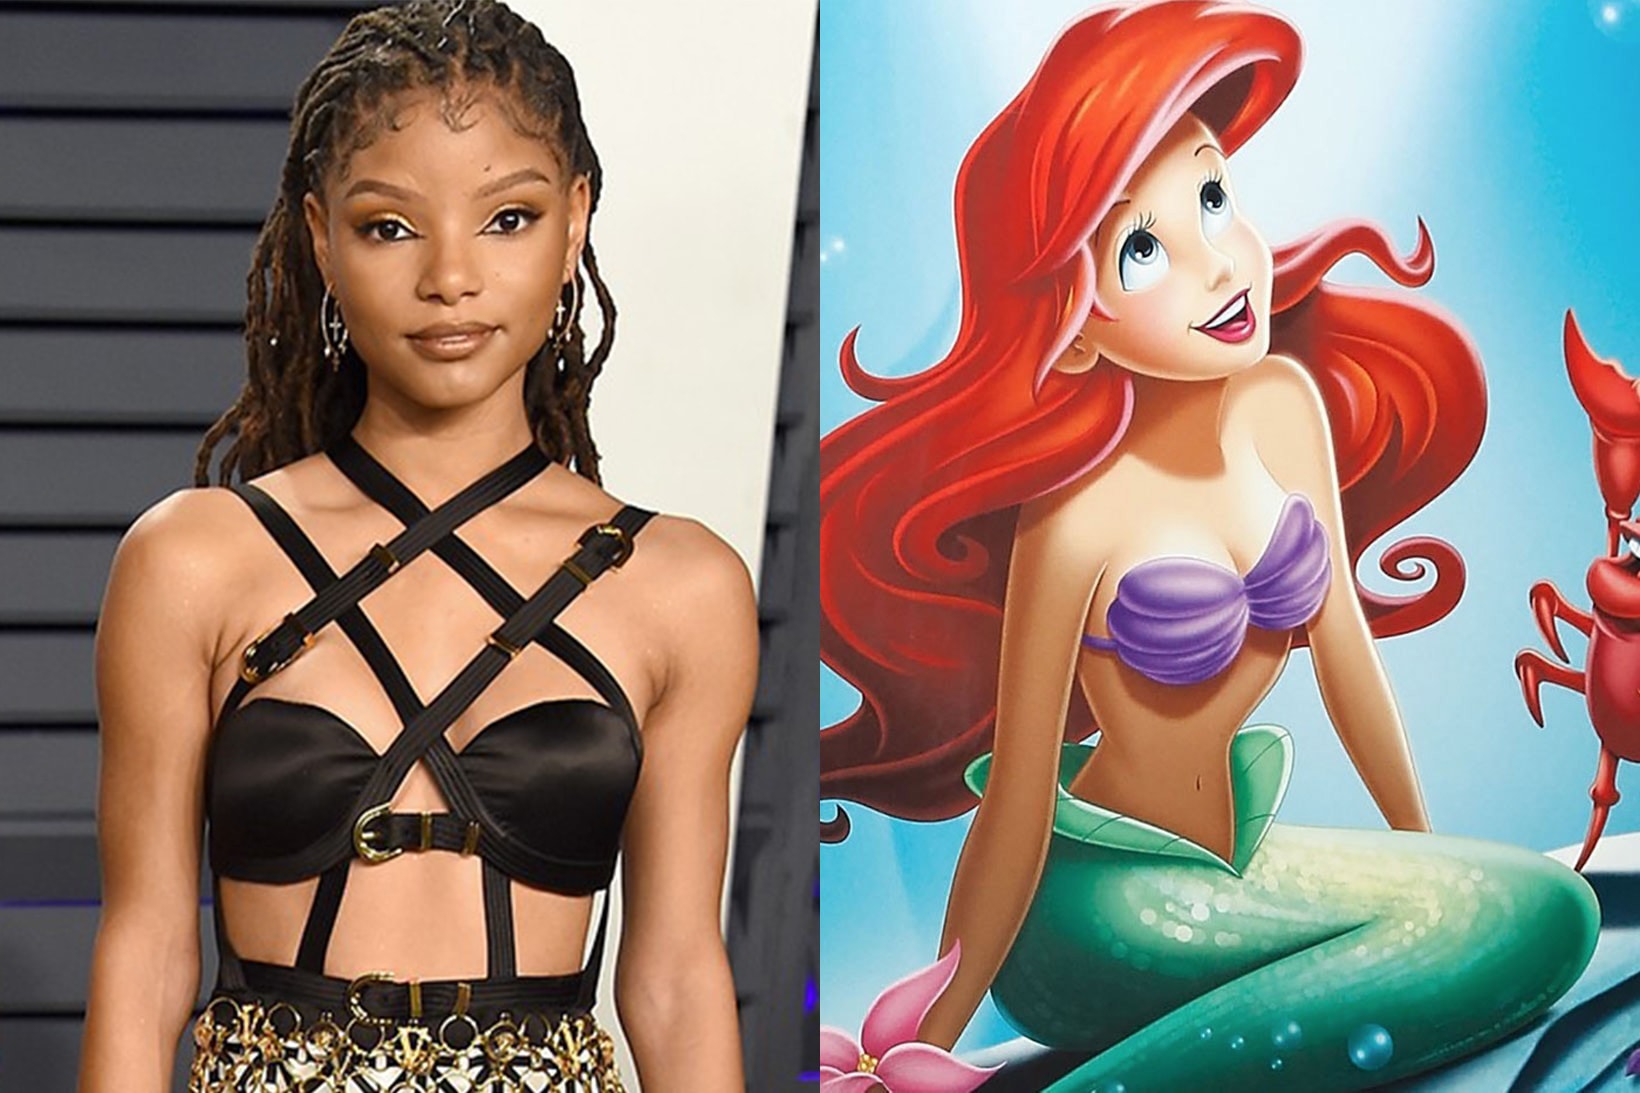 Ariel from All-New “The Little Mermaid” Live-Action Film Coming to